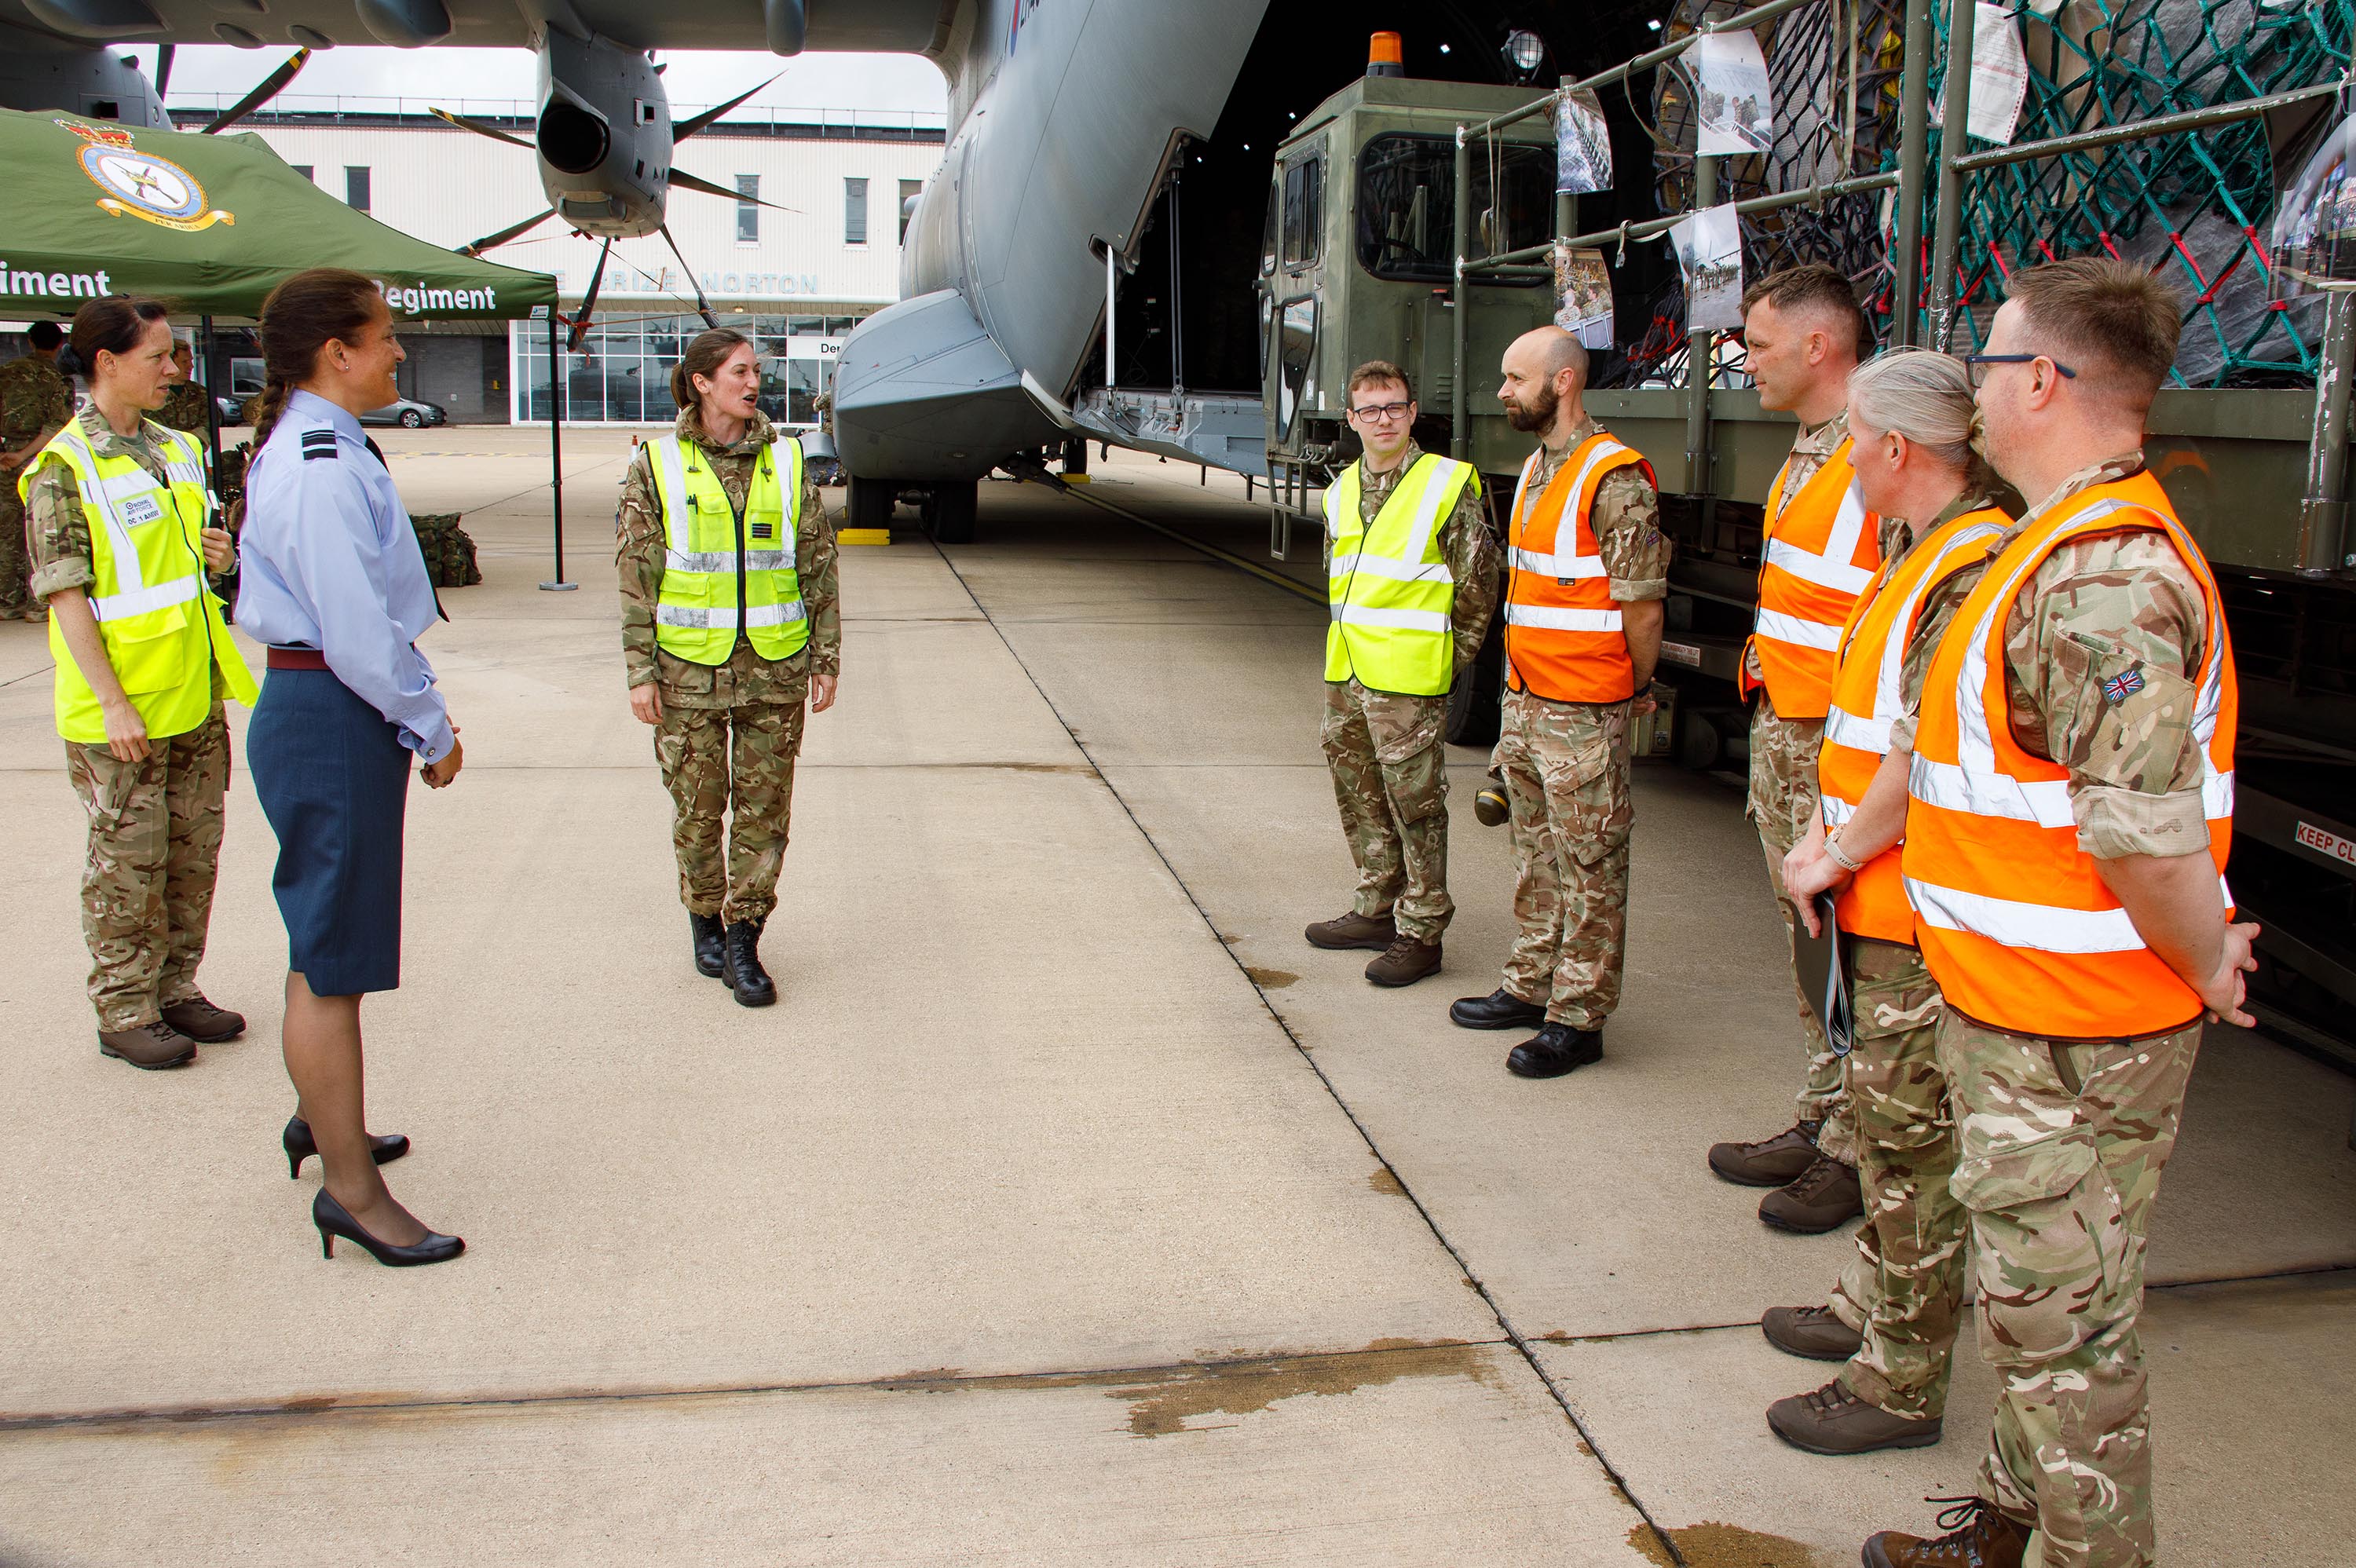 This week, we held two ceremonies for Air Officer Commanding 1 Group, Air Vice Marshal (AVM) Mark Flewin and Air Officer Commanding 2 Group, Air Vice Marshal (AVM) Suraya Marshall, to present awards to RAF Brize Norton personnel.